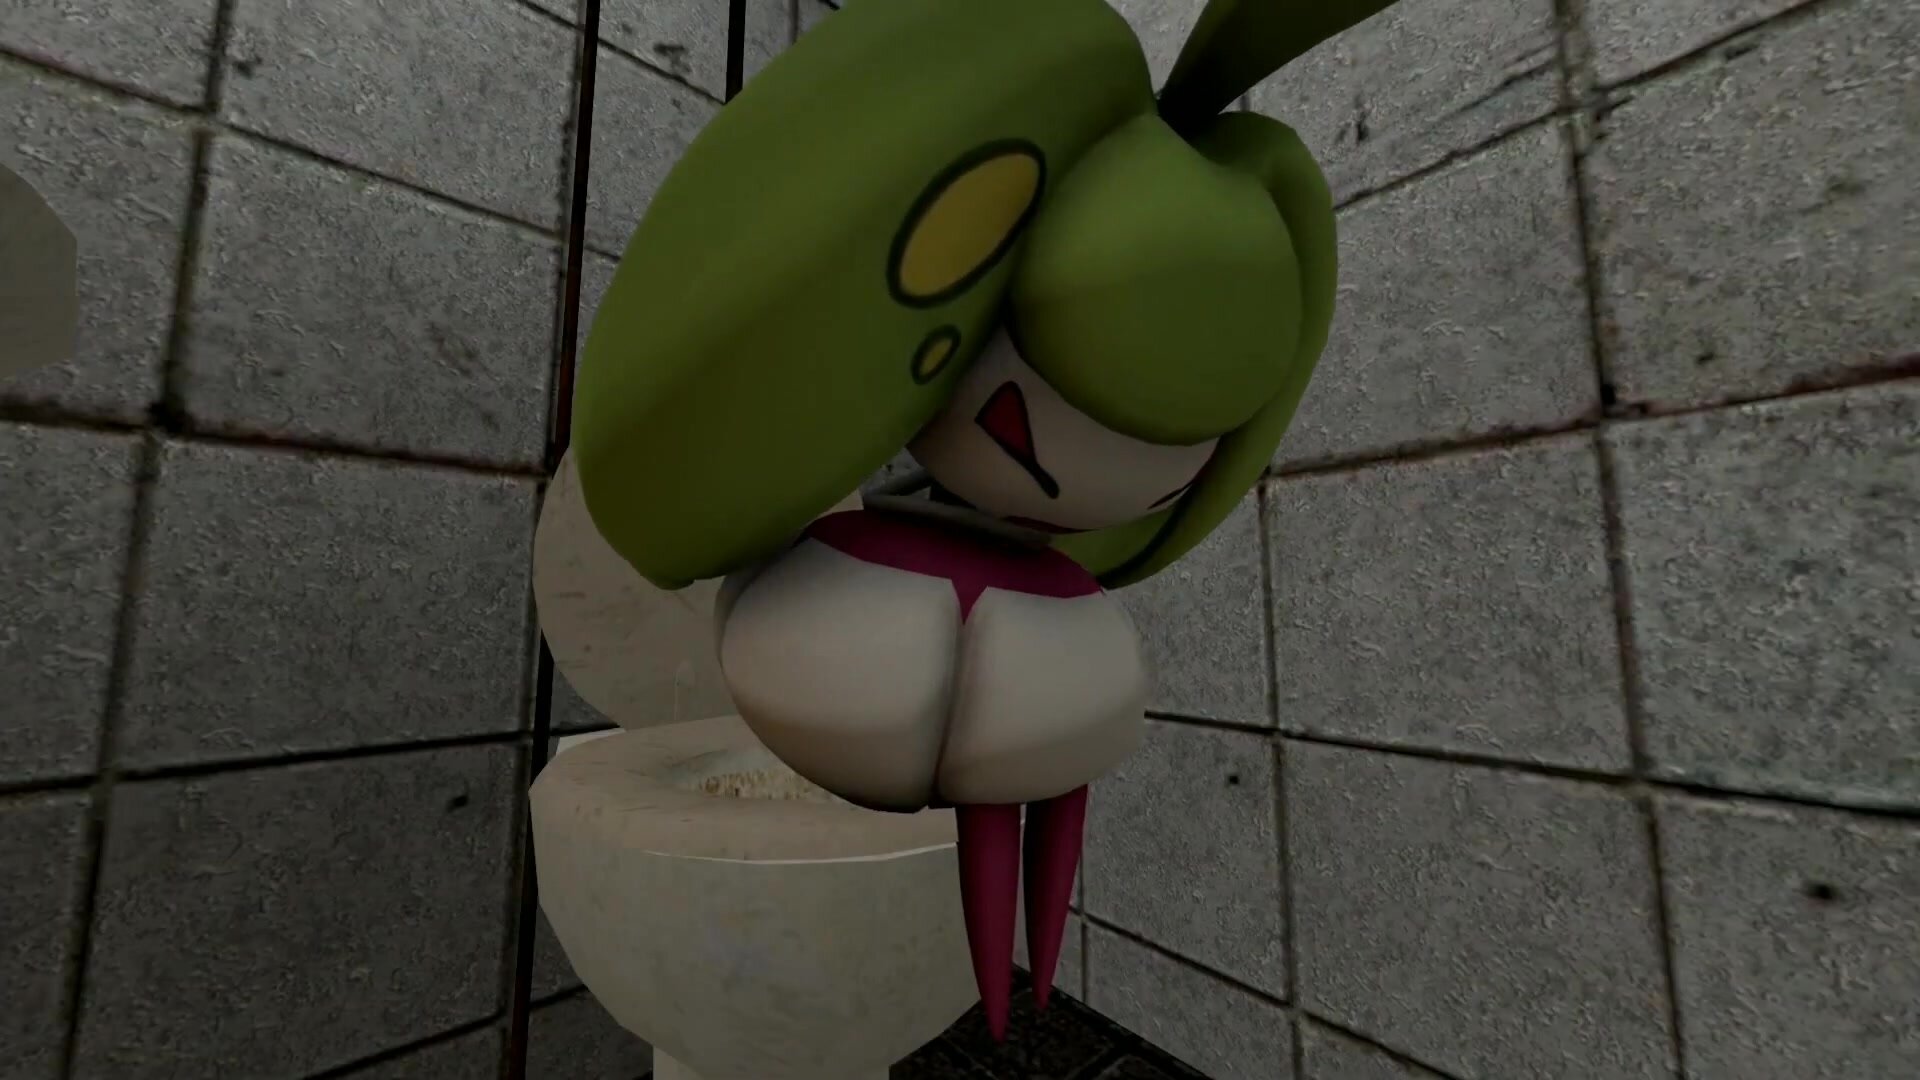 SFM Steenee Farting and Pooping image picture